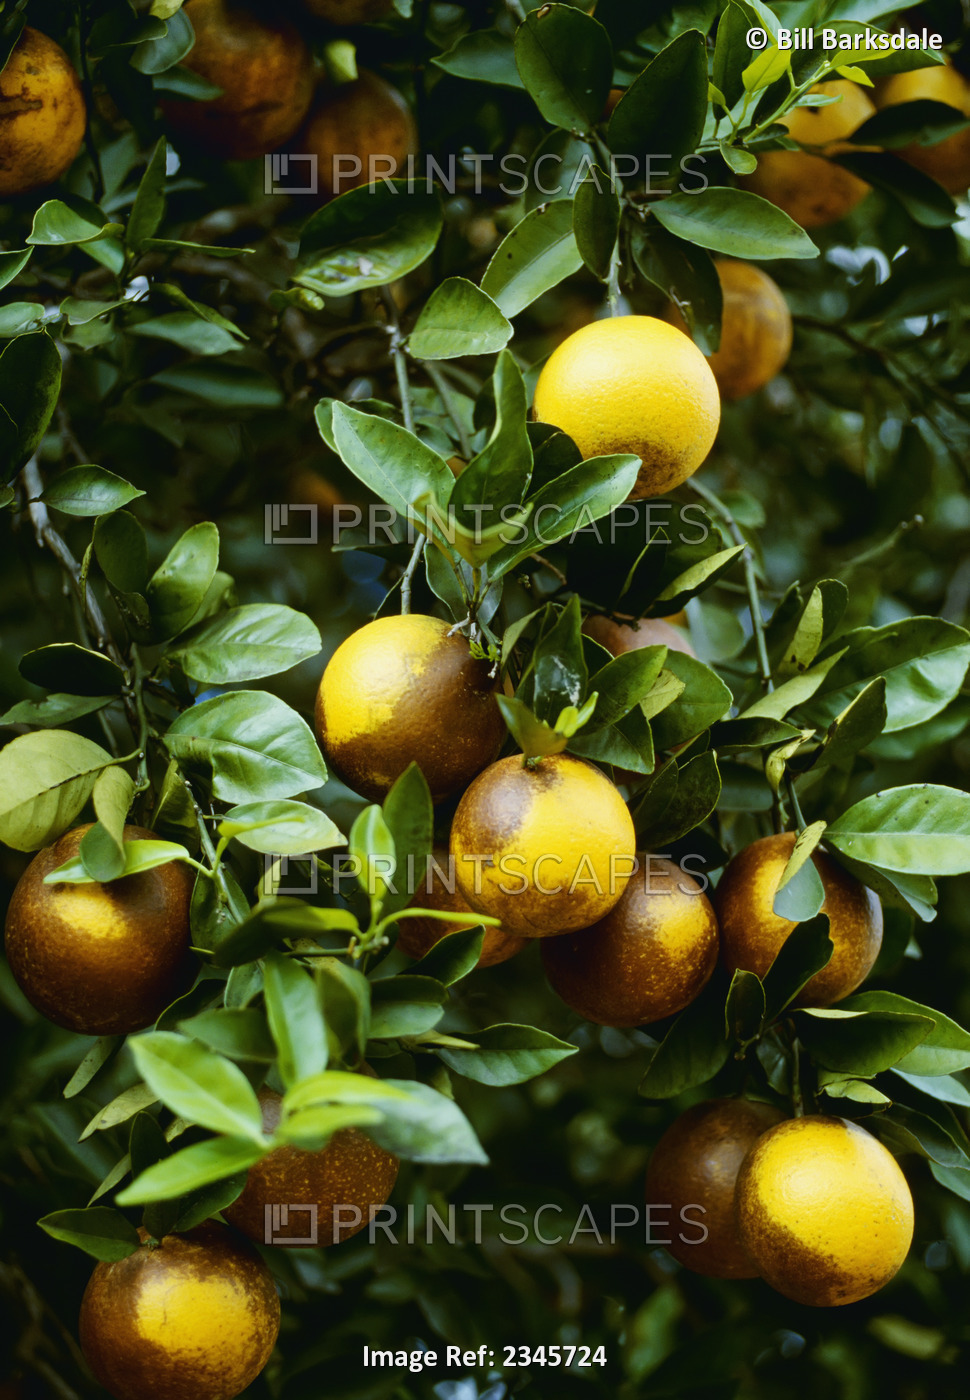 Agriculture - Crop damage, Russeting damage on oranges caused by Citrus rust ...